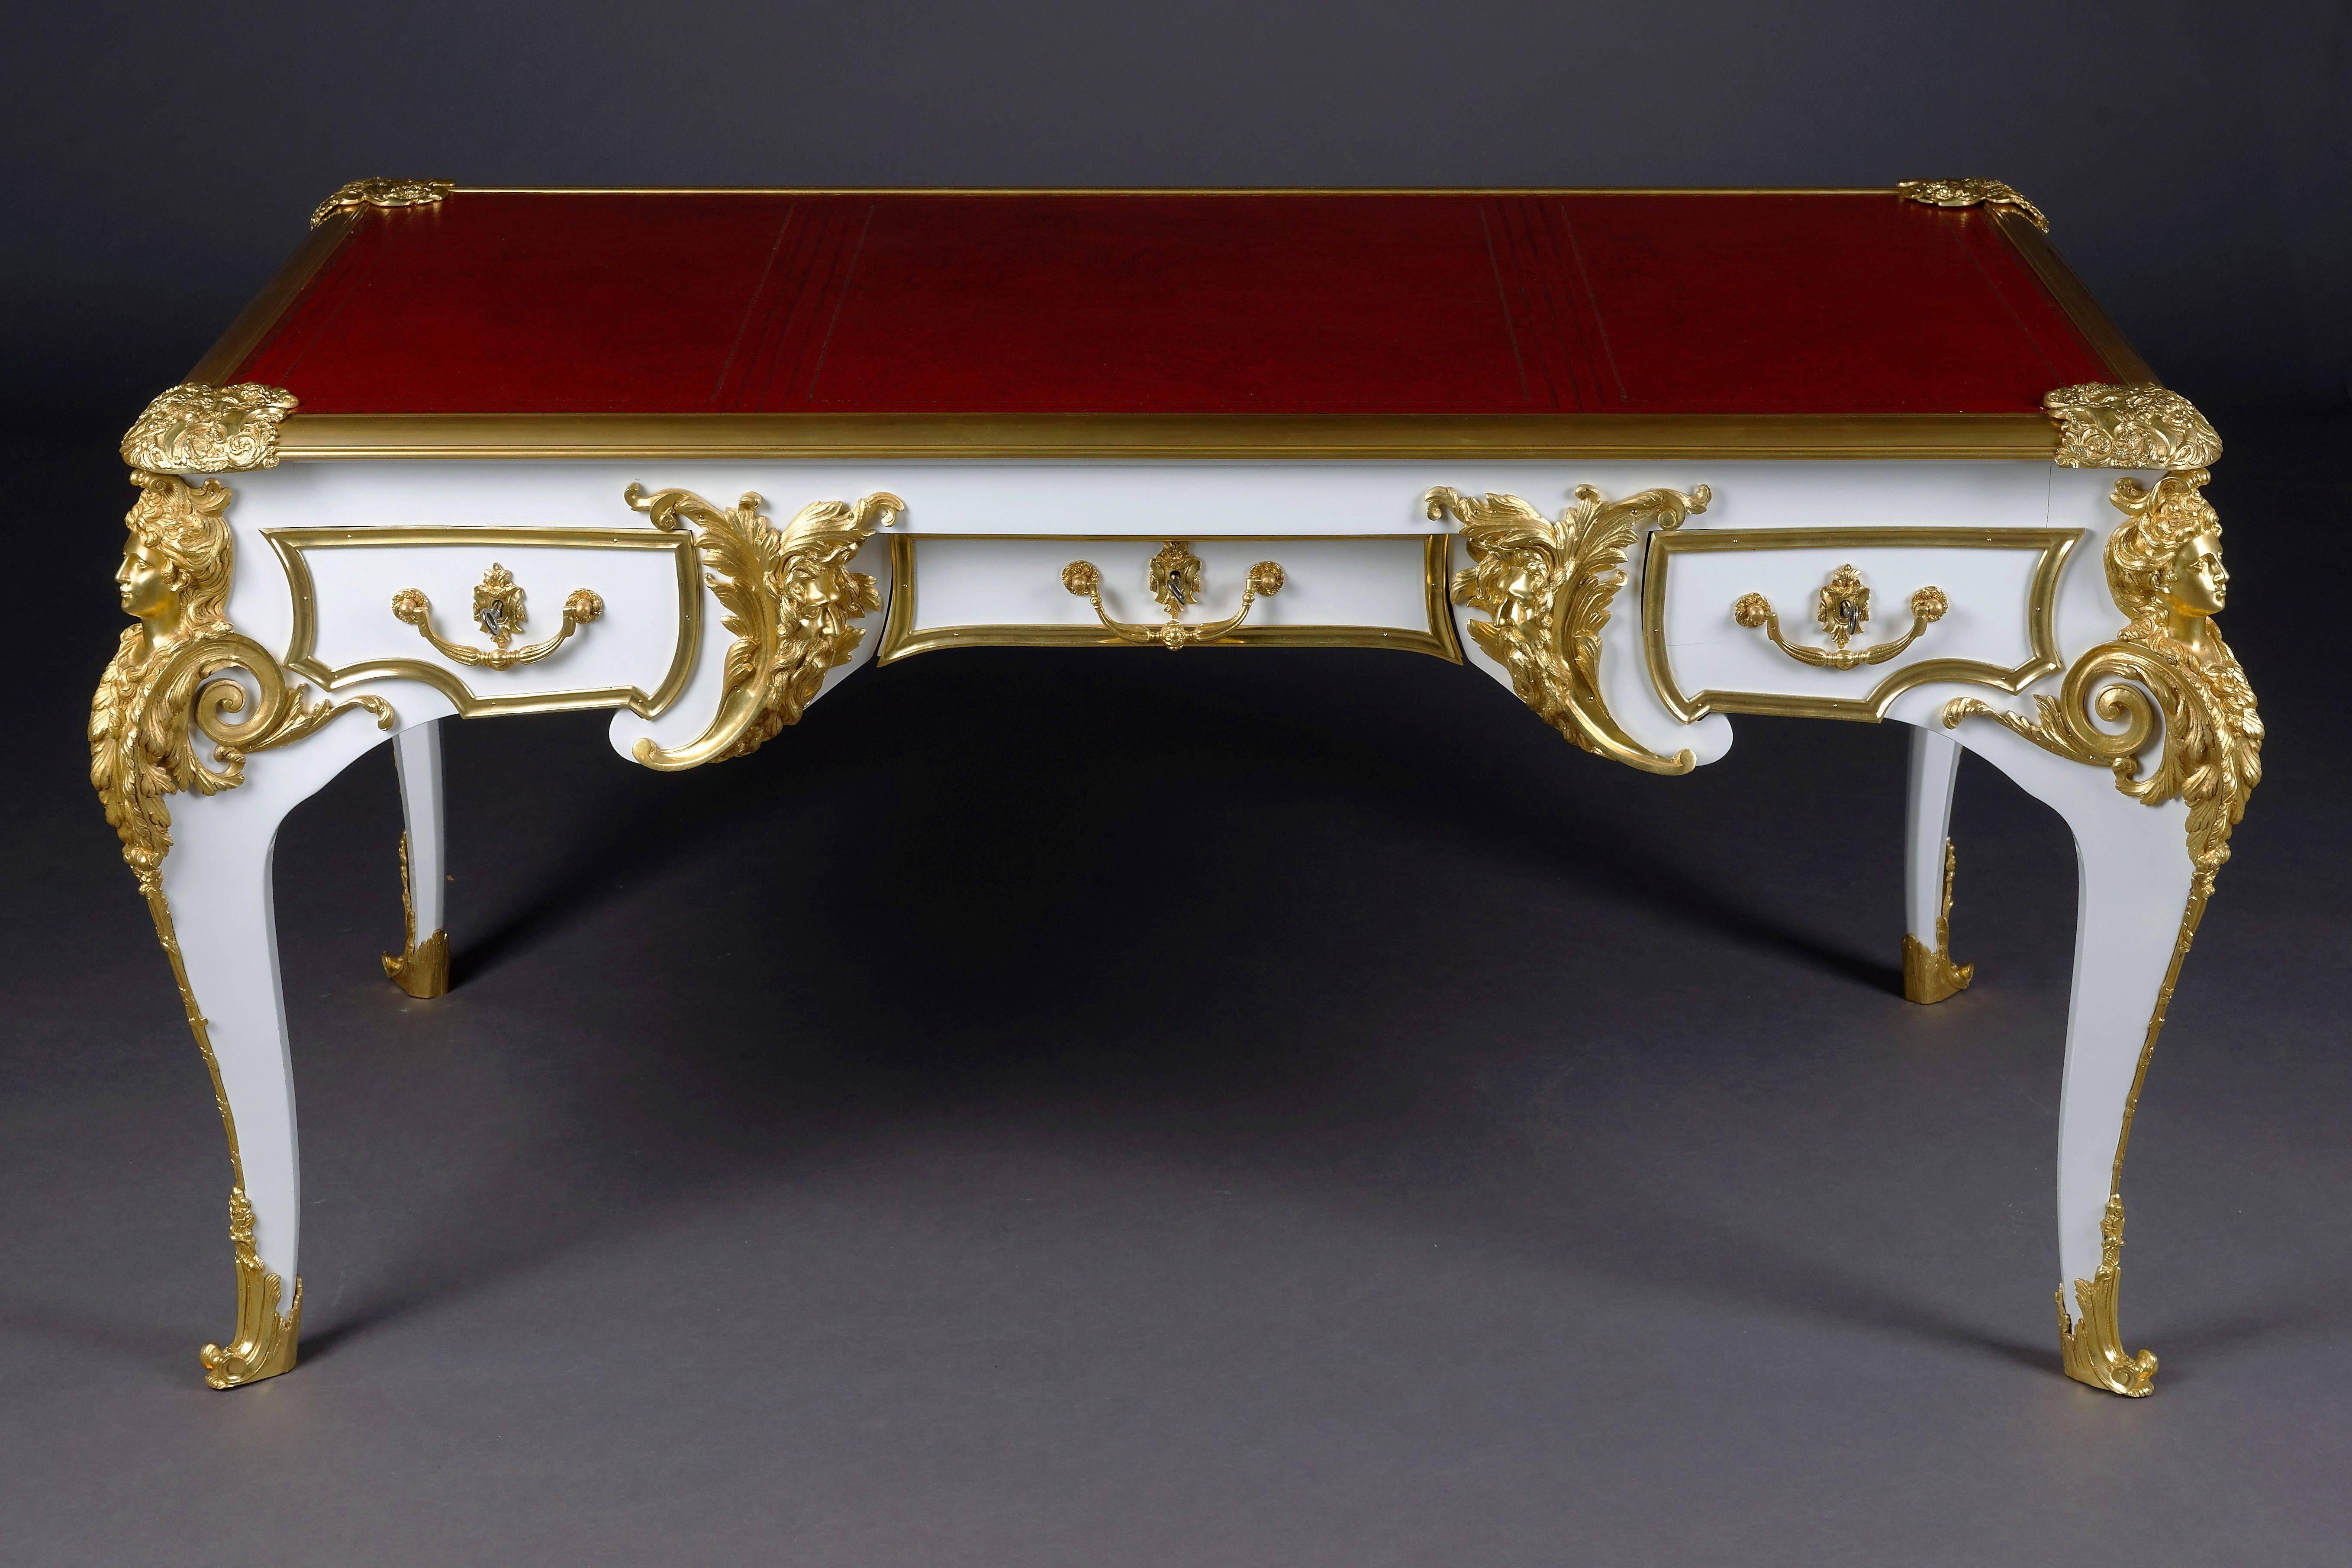 This model was built by Charles Boulle, the most important and historian of Louis XV.
Piano white polished veneer on solid beech and oak. Extremely finely chiselled bronze. Slightly protruding, profiled tabletop and gold-embossed leather insert,